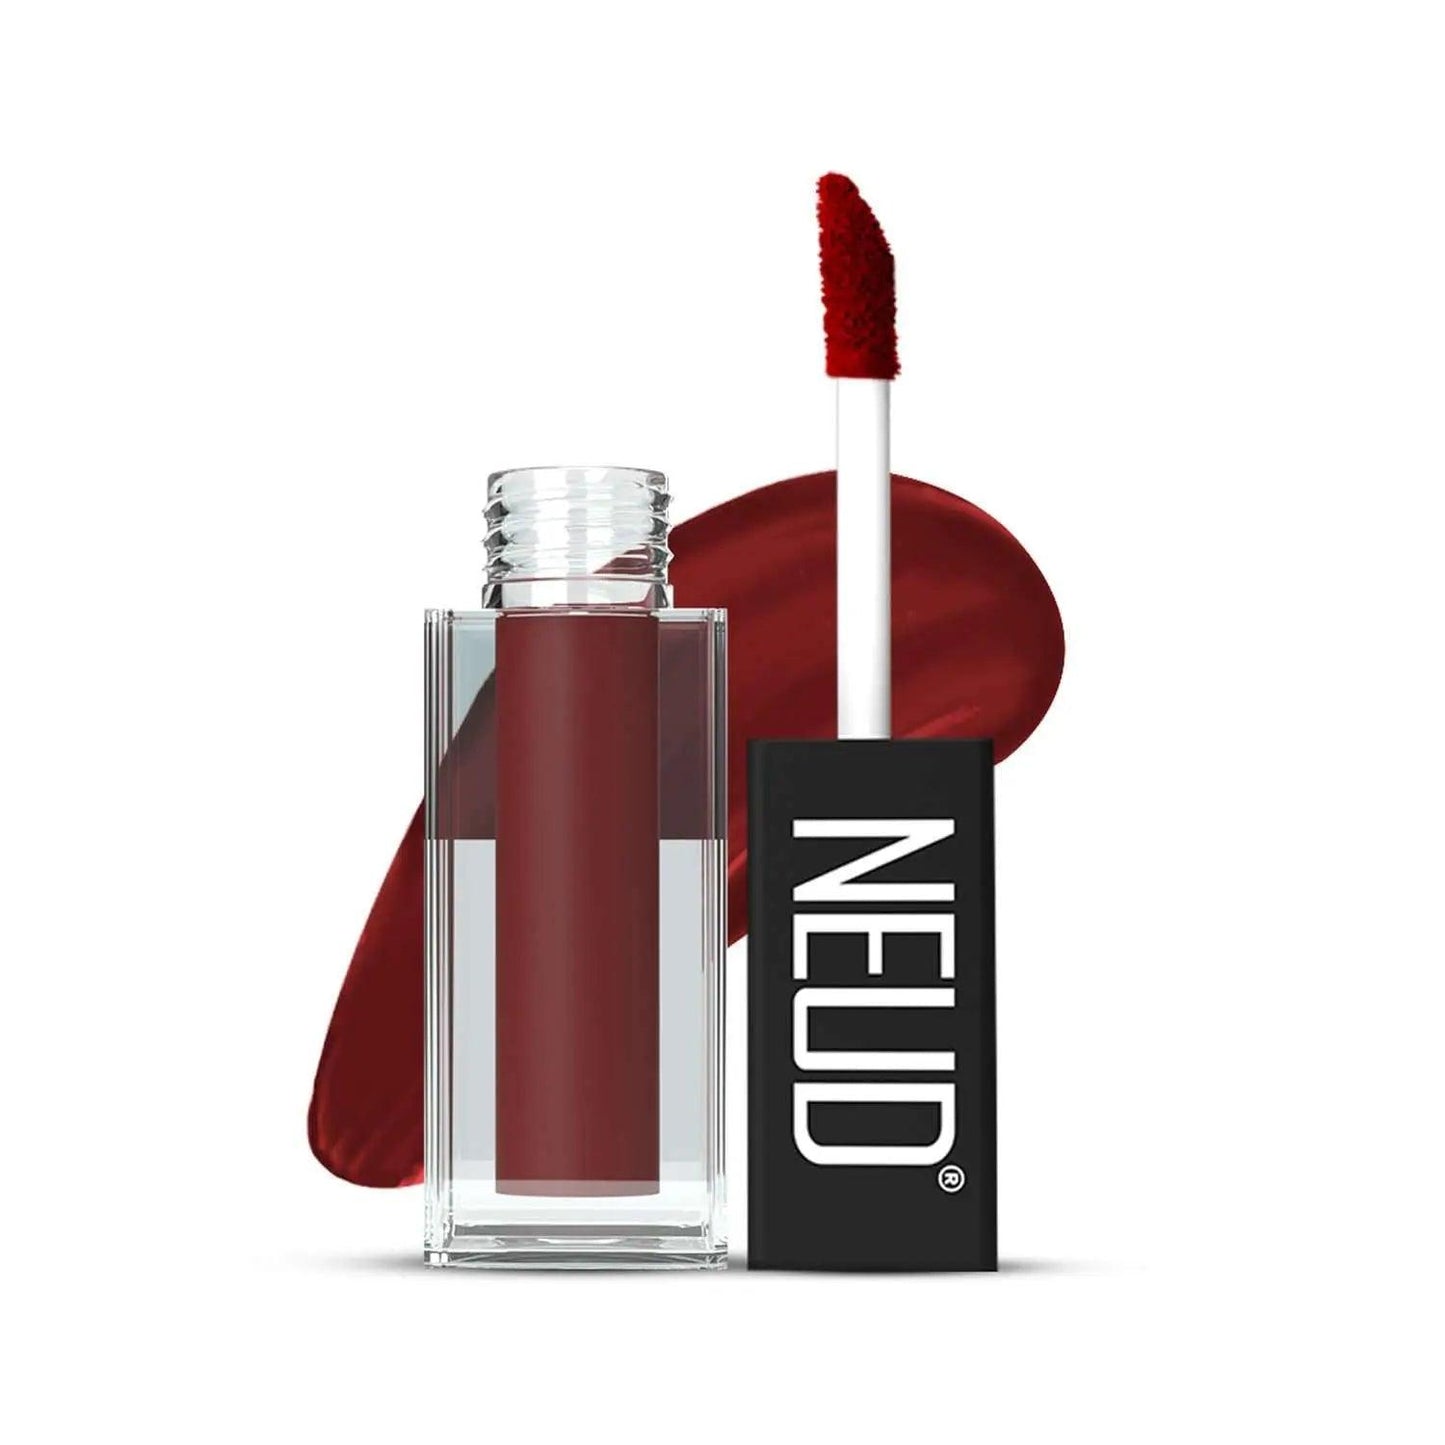 NEUD Matte Liquid Lipstick Red Kiss with Jojoba Oil, Vitamin E and Almond Oil - Smudge Proof 12-hour Stay Formula with Free Lip Gloss 8906116281239